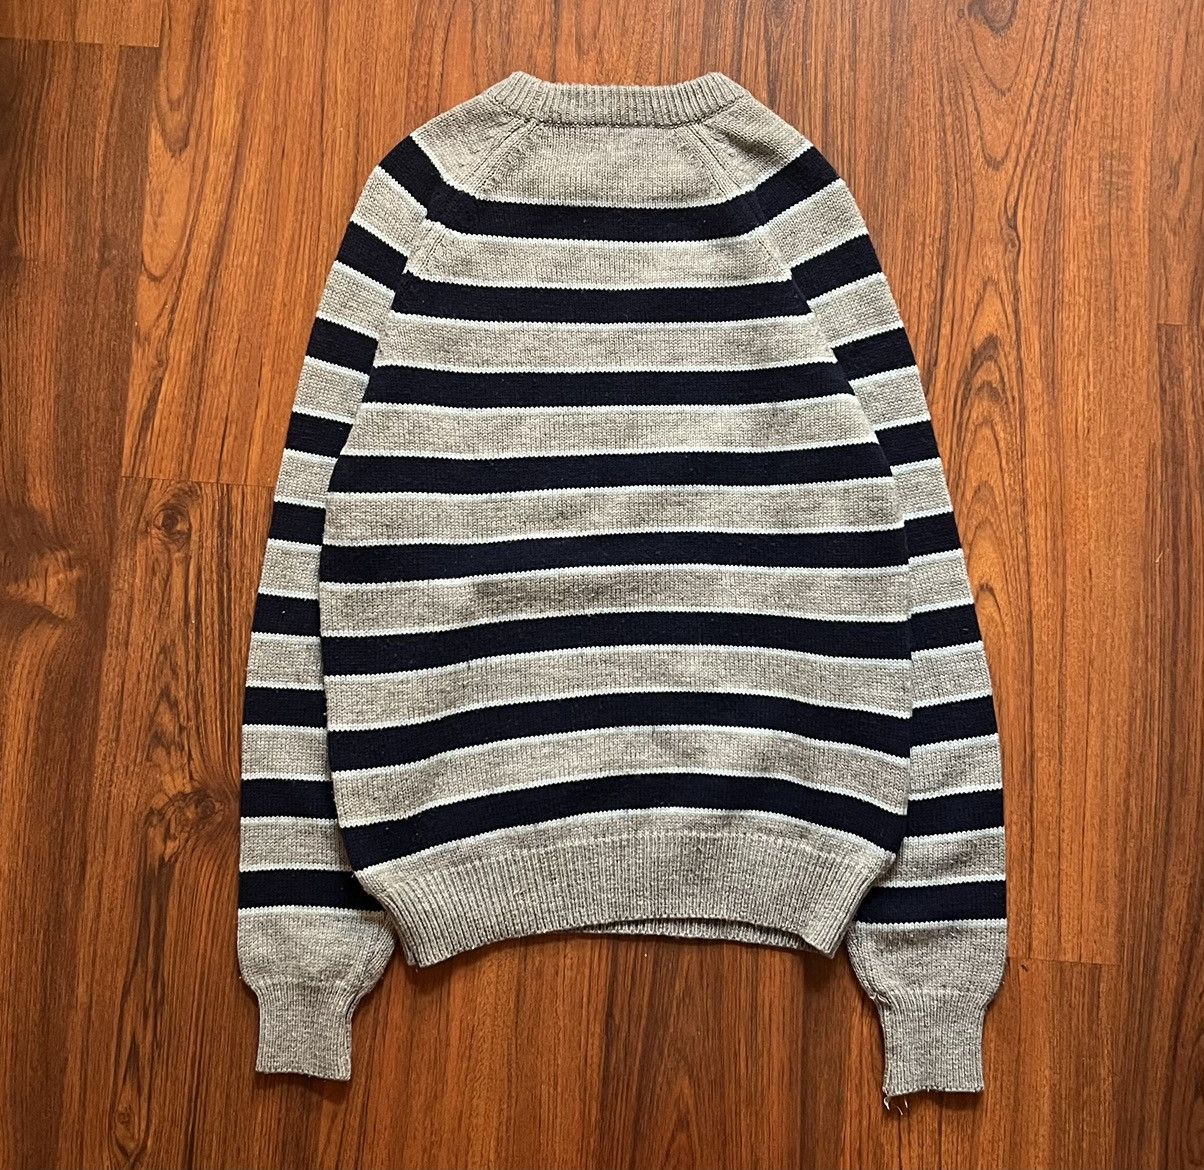 Vintage Vintage 80s David Gregg Wool Striped Sweater Romanian Made Size US M / EU 48-50 / 2 - 4 Preview